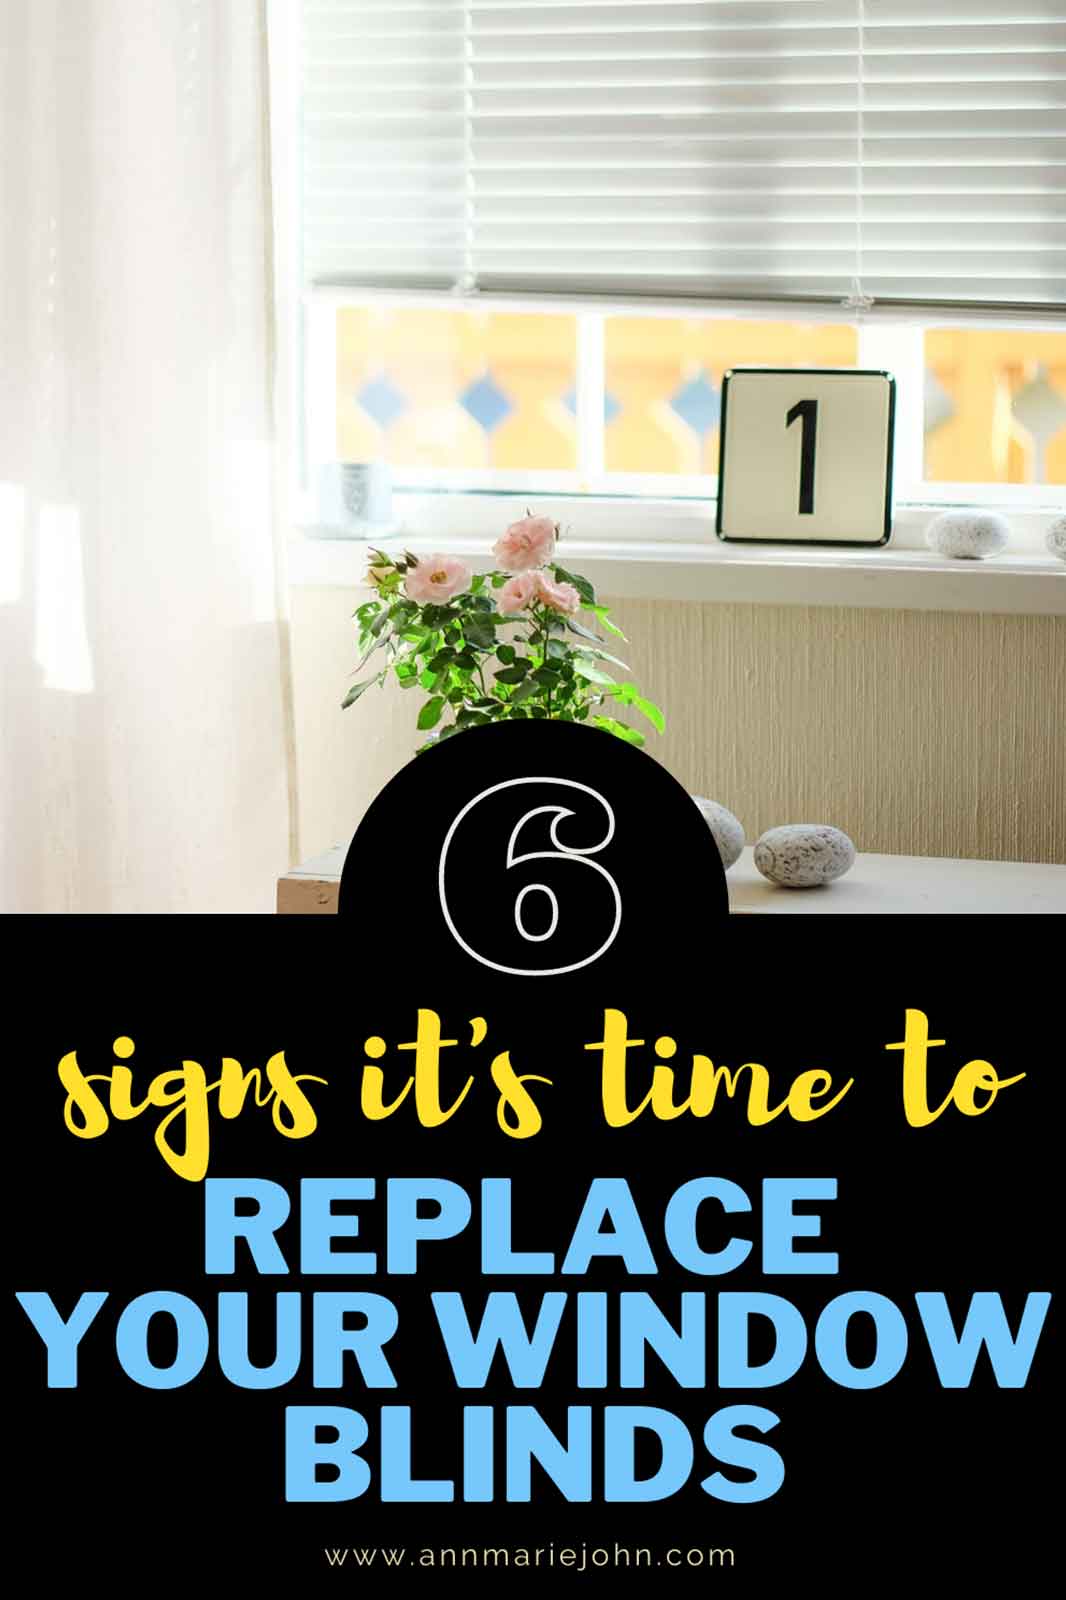 6 Signs Its Time to Replace Your Windows 40991 - 6 Signs It’s Time to Replace Your Windows